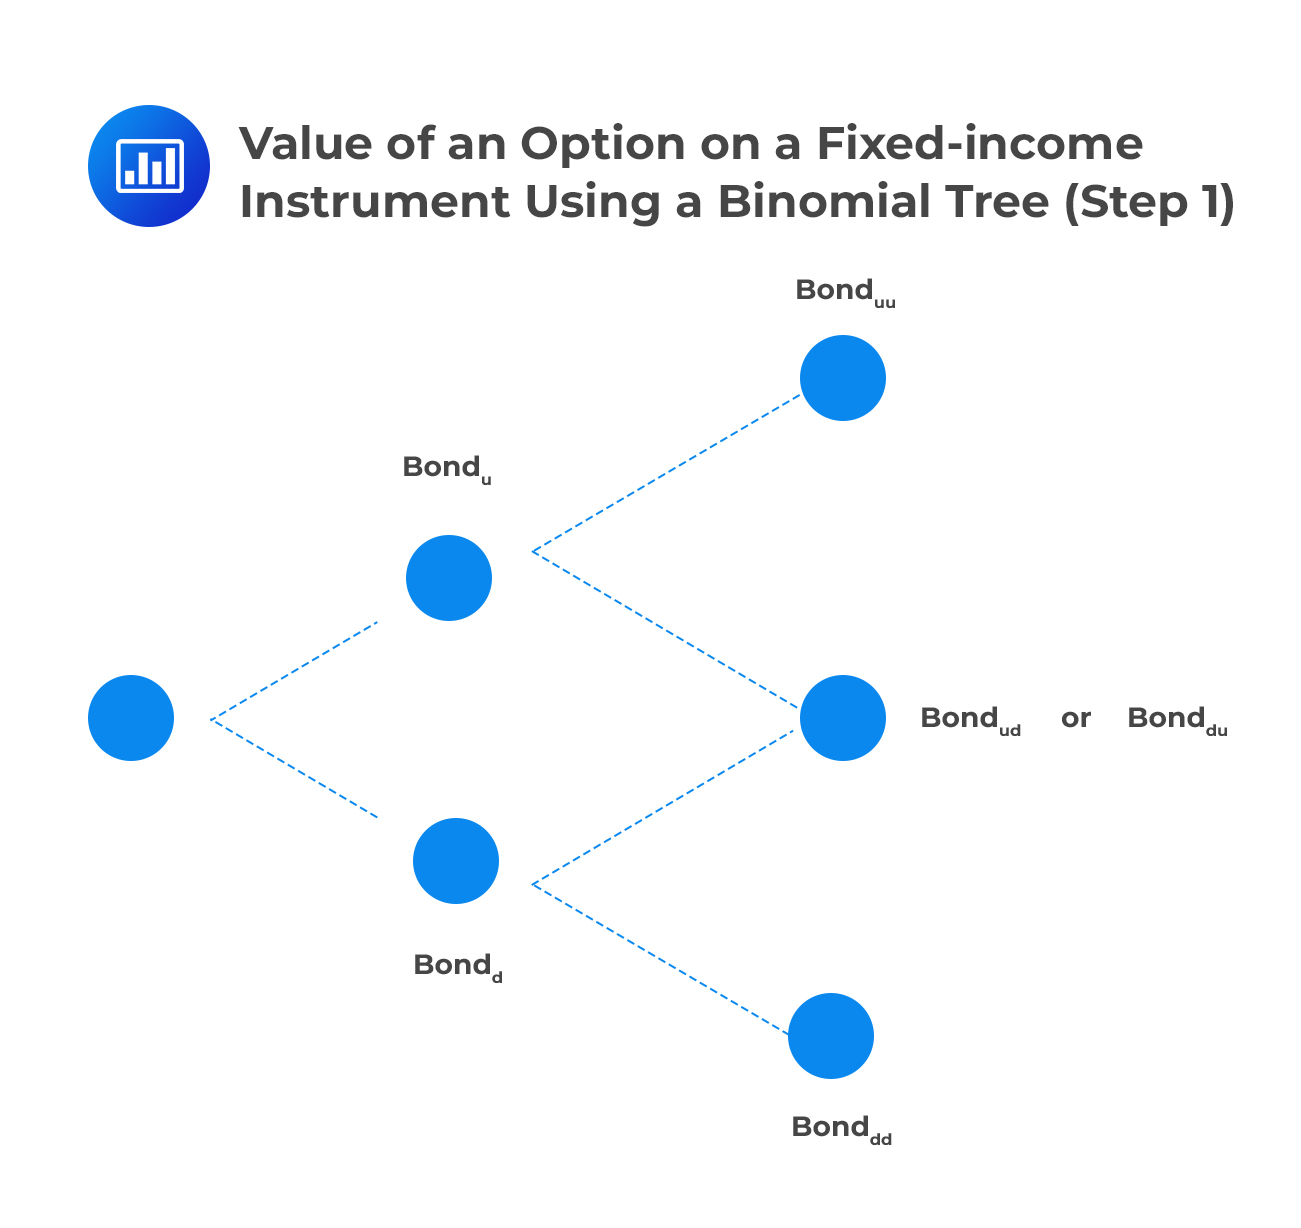 Value of an Option on a Fixed-income Instrument Using a Binomial Tree (Step 1)